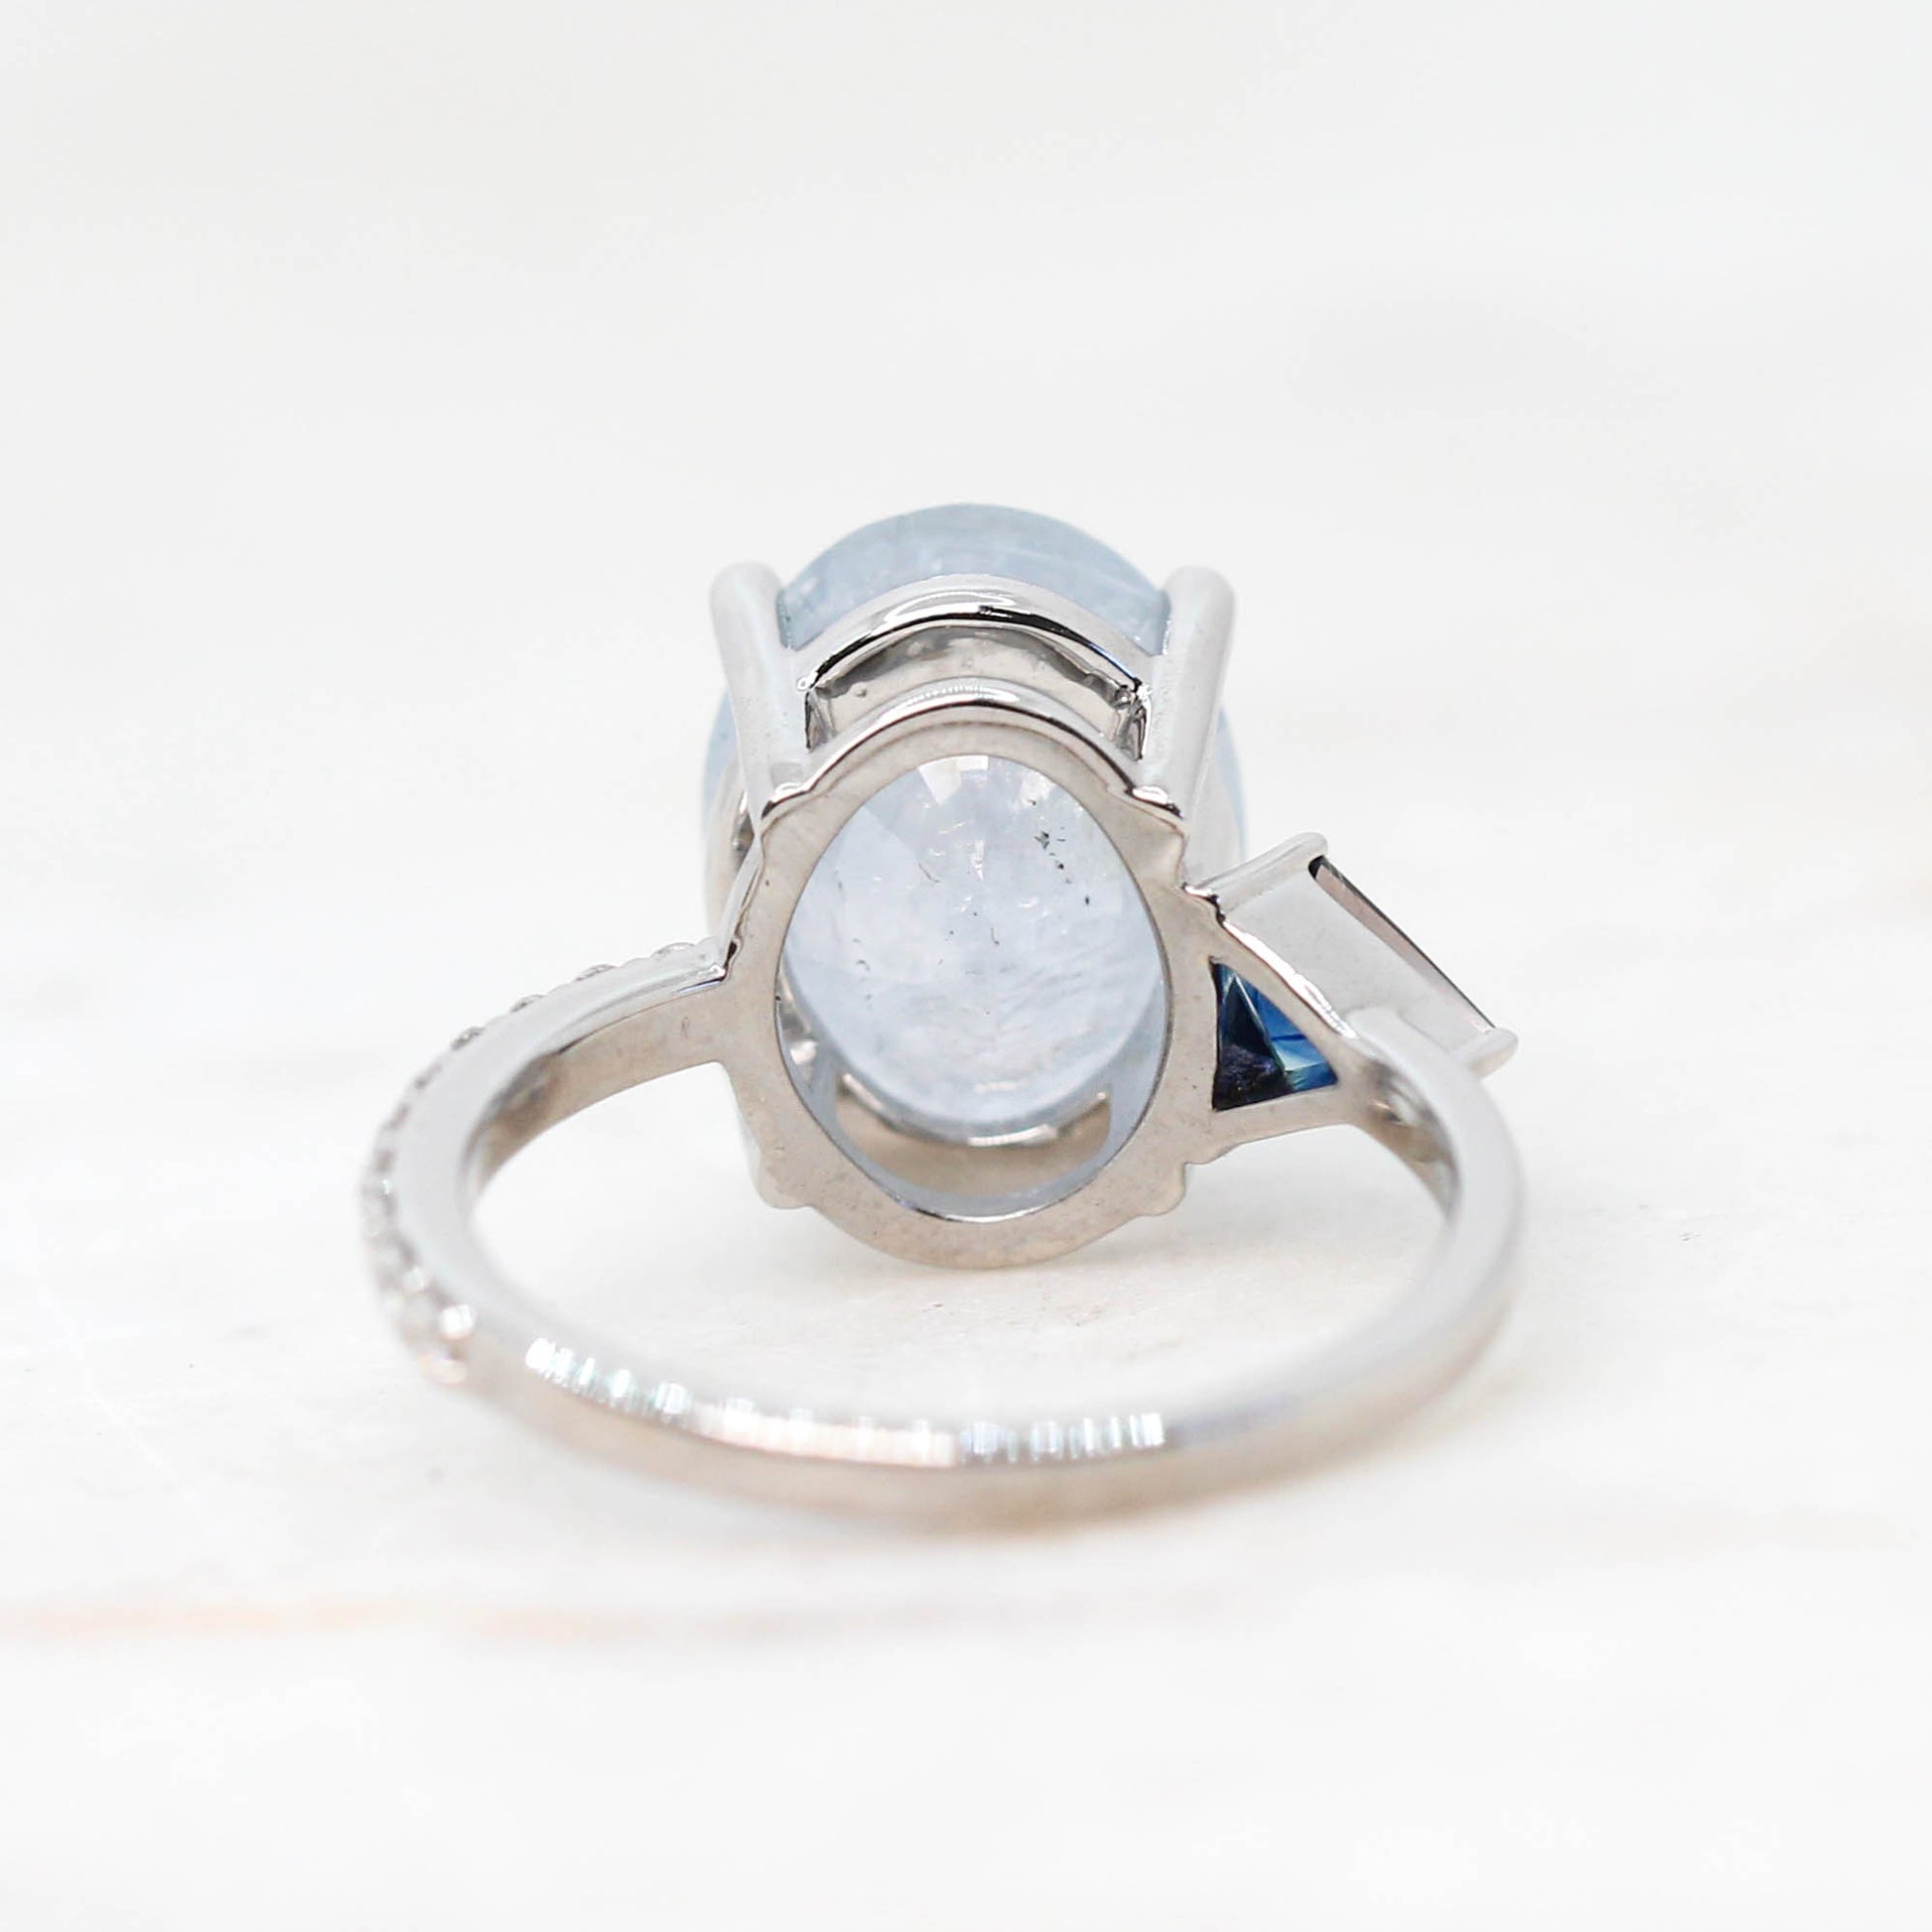 Zephyr Ring with a 6.62 Carat Light Blue Sapphire, Accent Sapphire and Accent Diamonds in 14k White Gold - Ready to Size and Ship - Midwinter Co. Alternative Bridal Rings and Modern Fine Jewelry